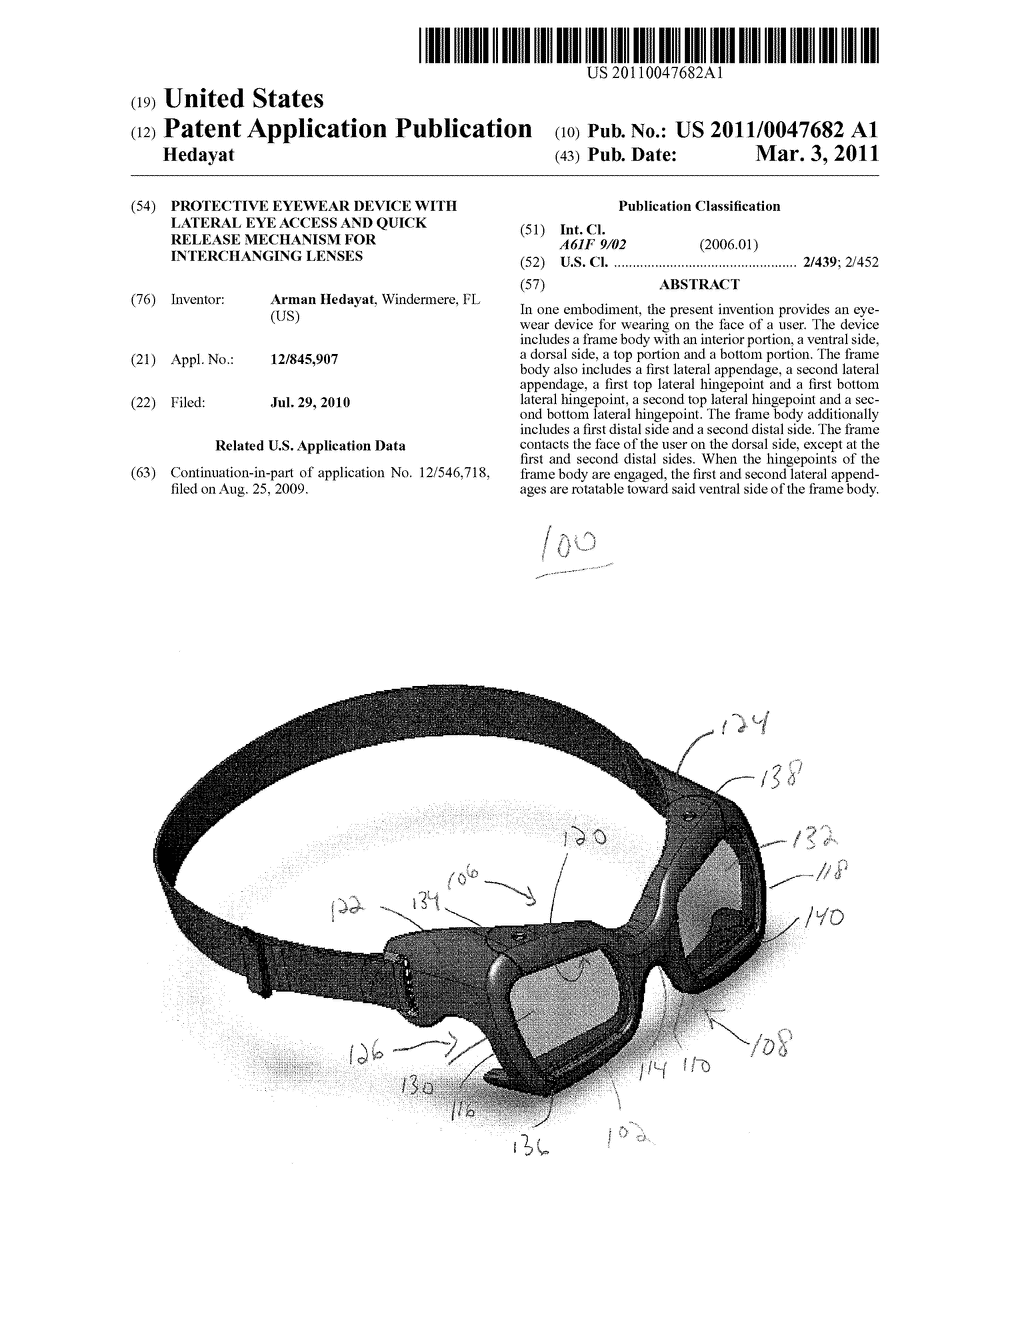 Protective Eyewear Device With Lateral Eye Access and Quick Release Mechanism for Interchanging Lenses - diagram, schematic, and image 01